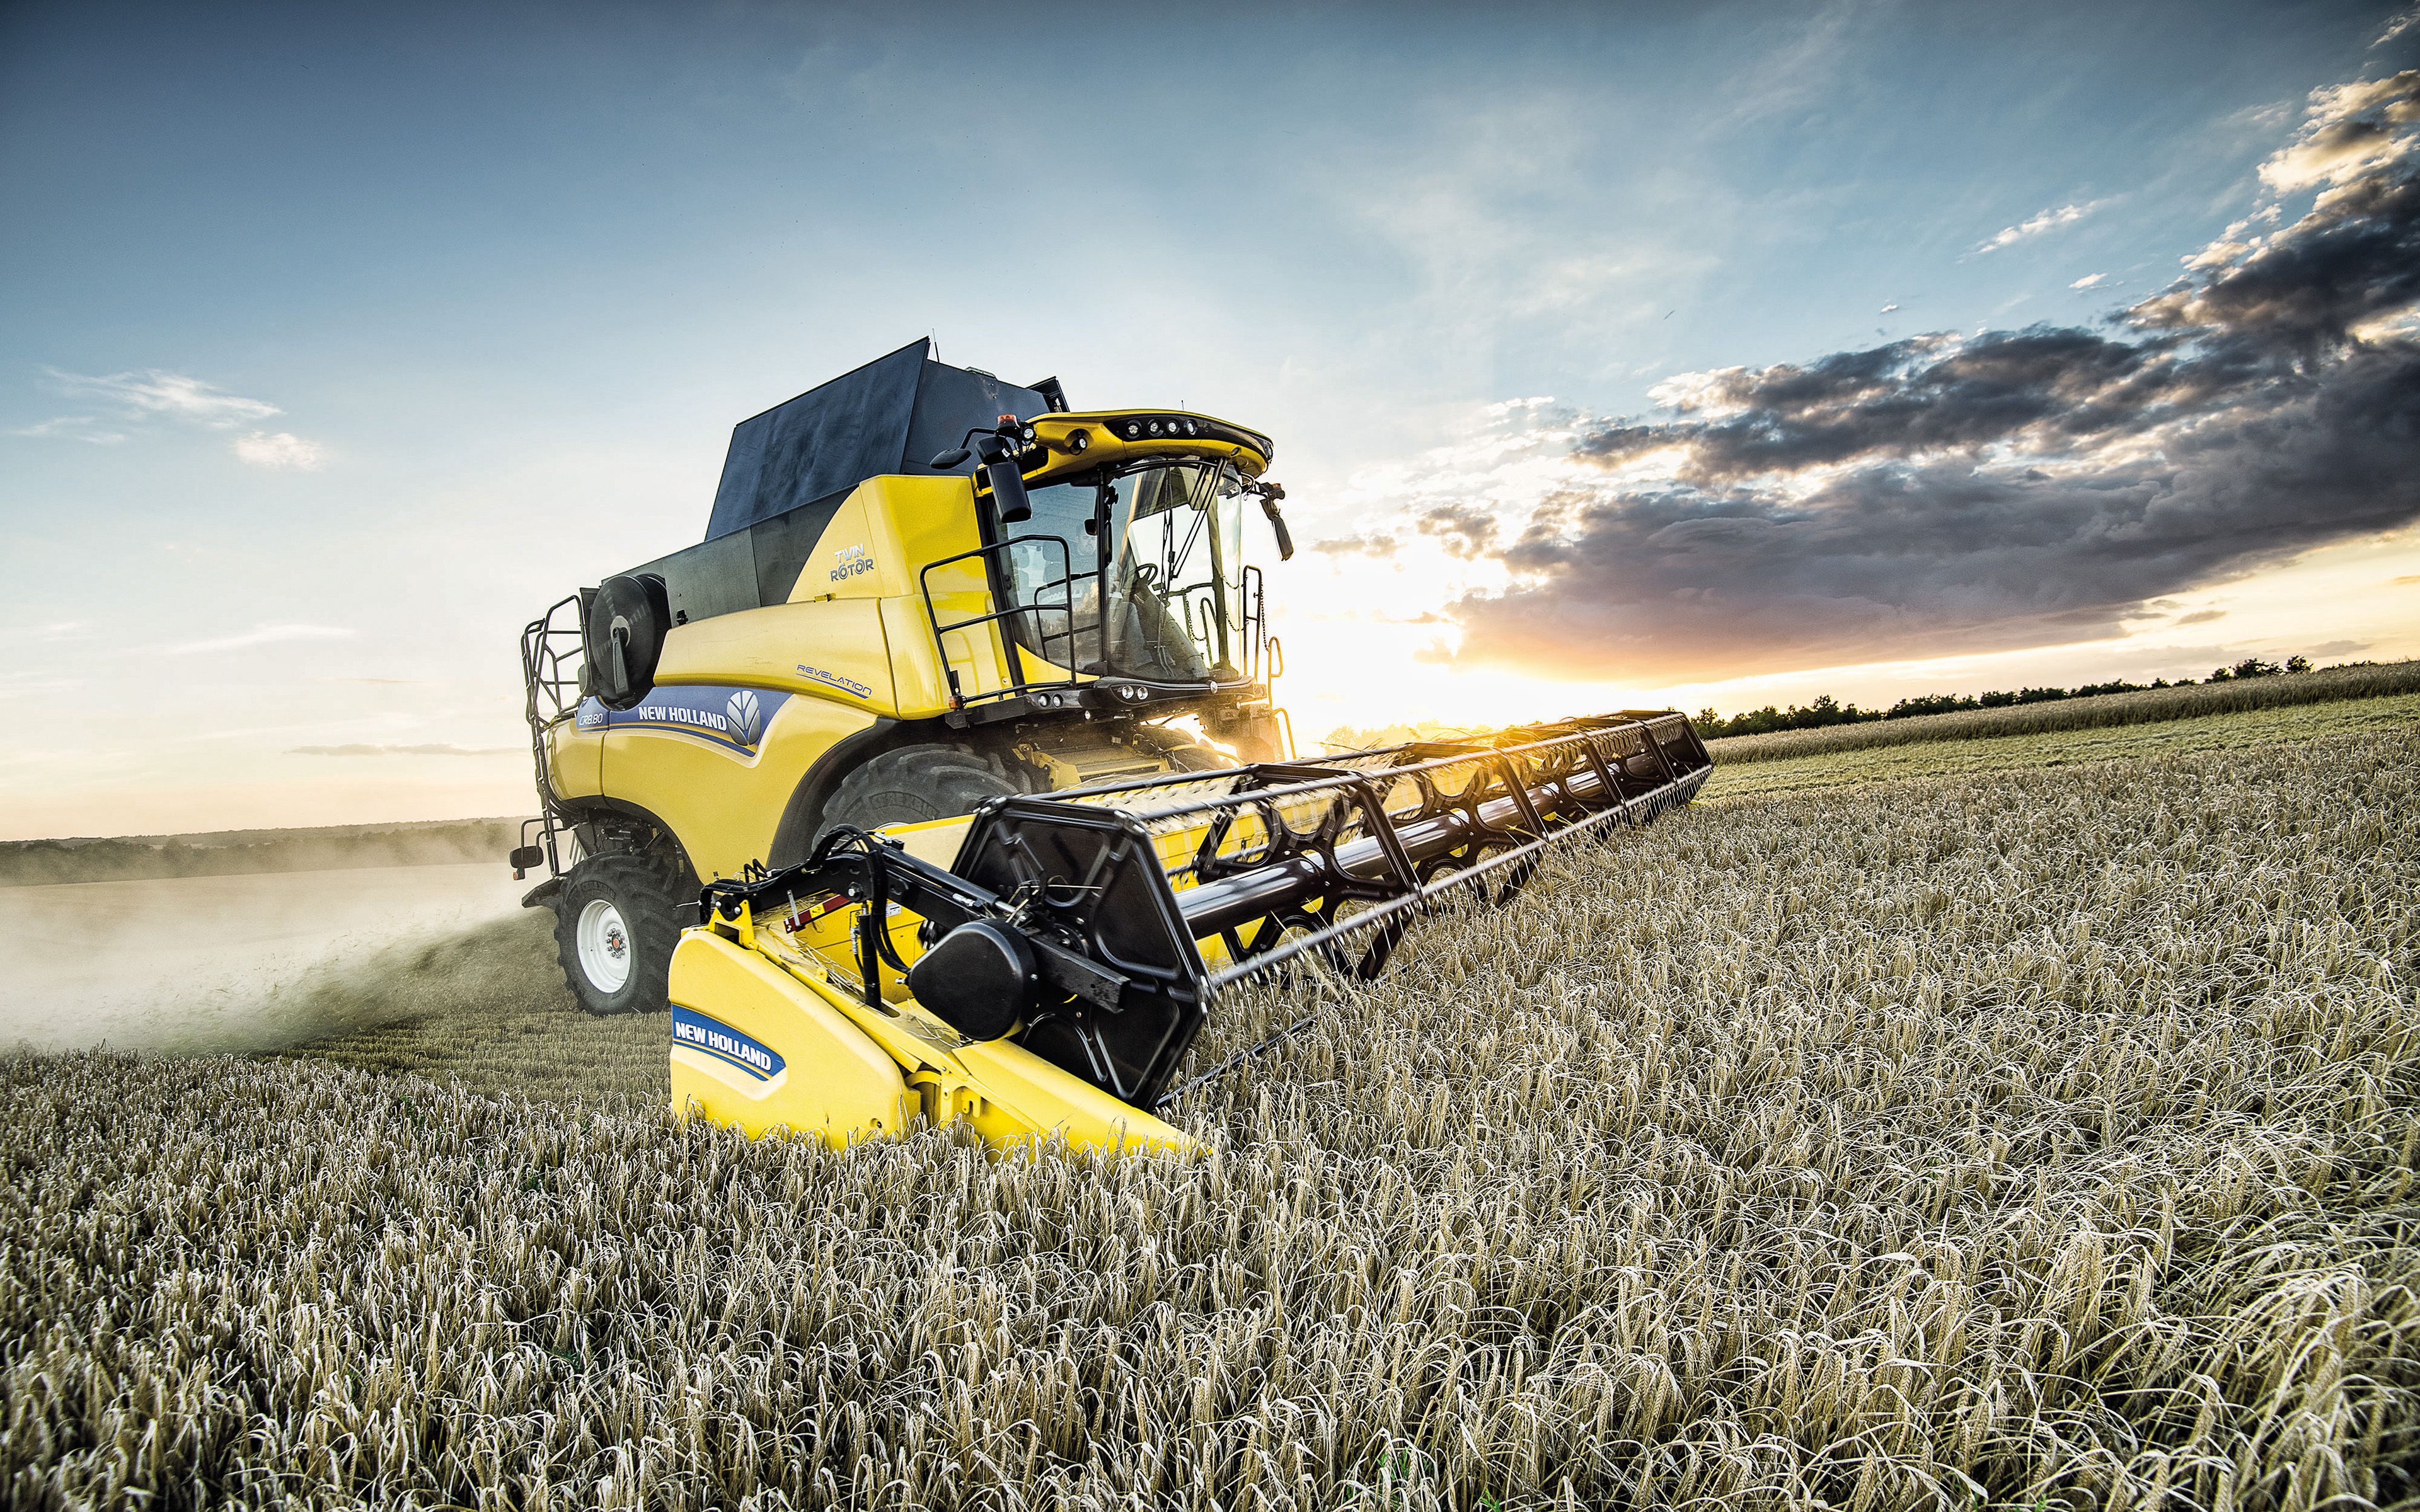 Download wallpaper New Holland CR8 80 Relevation, 4k, wheat harvest, 2019 combines, agricultural machinery, HDR, grain harvesting, combine harvester, Combine in the field, agriculture, New Holland Agriculture, yellow combine for desktop with